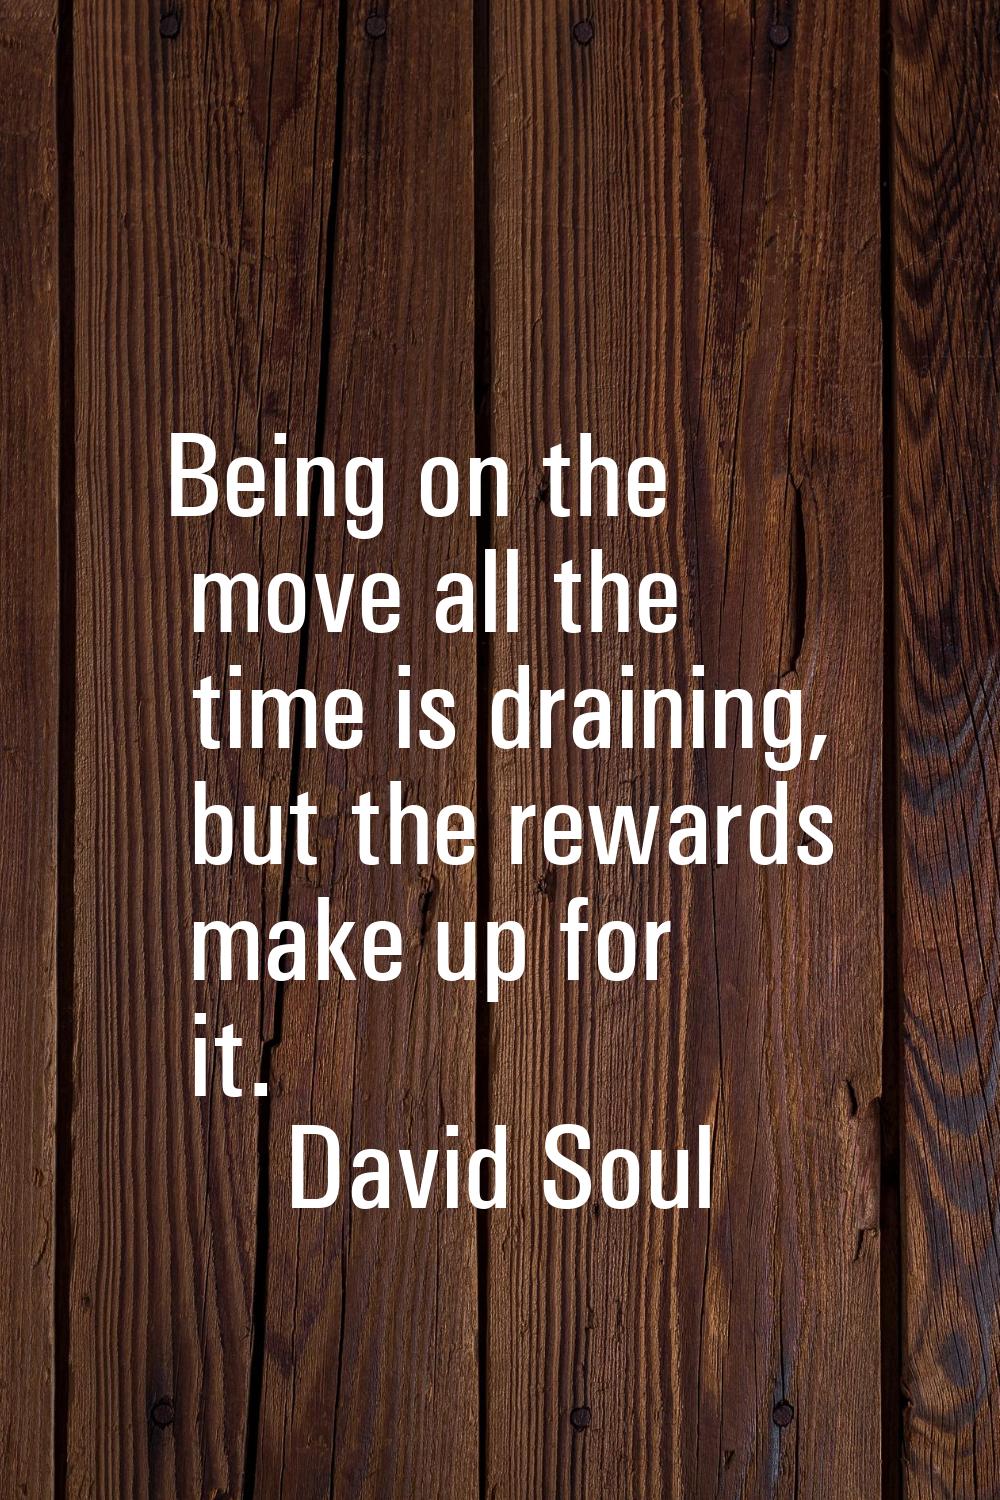 Being on the move all the time is draining, but the rewards make up for it.